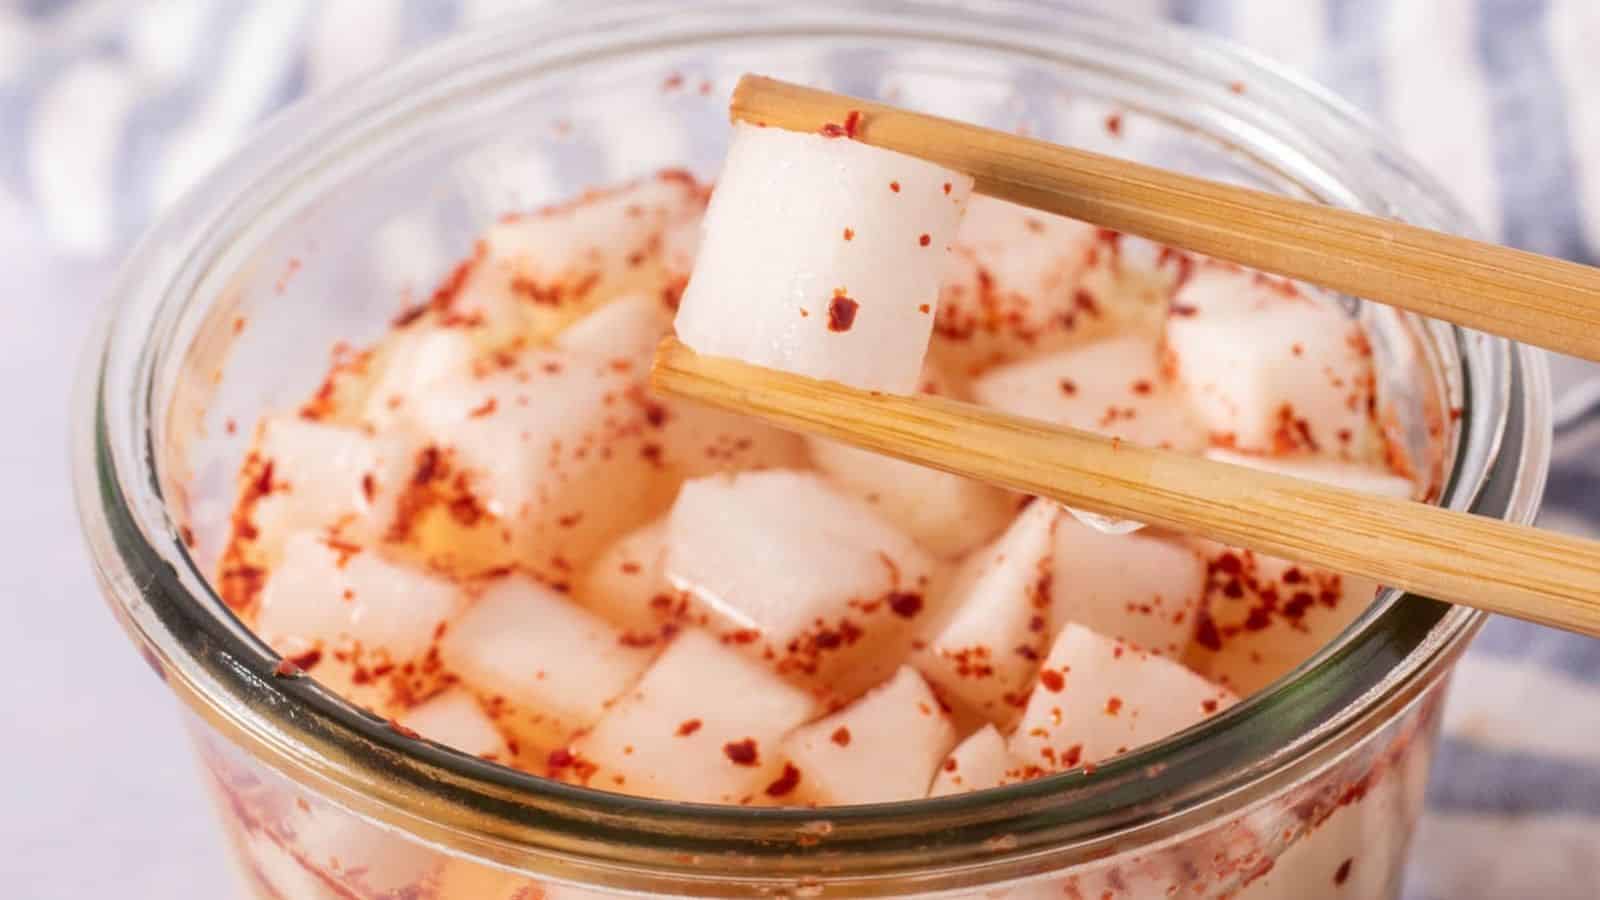 A close-up of a glass jar filled with small, cubed pieces of radish, seasoned with red chili flakes.